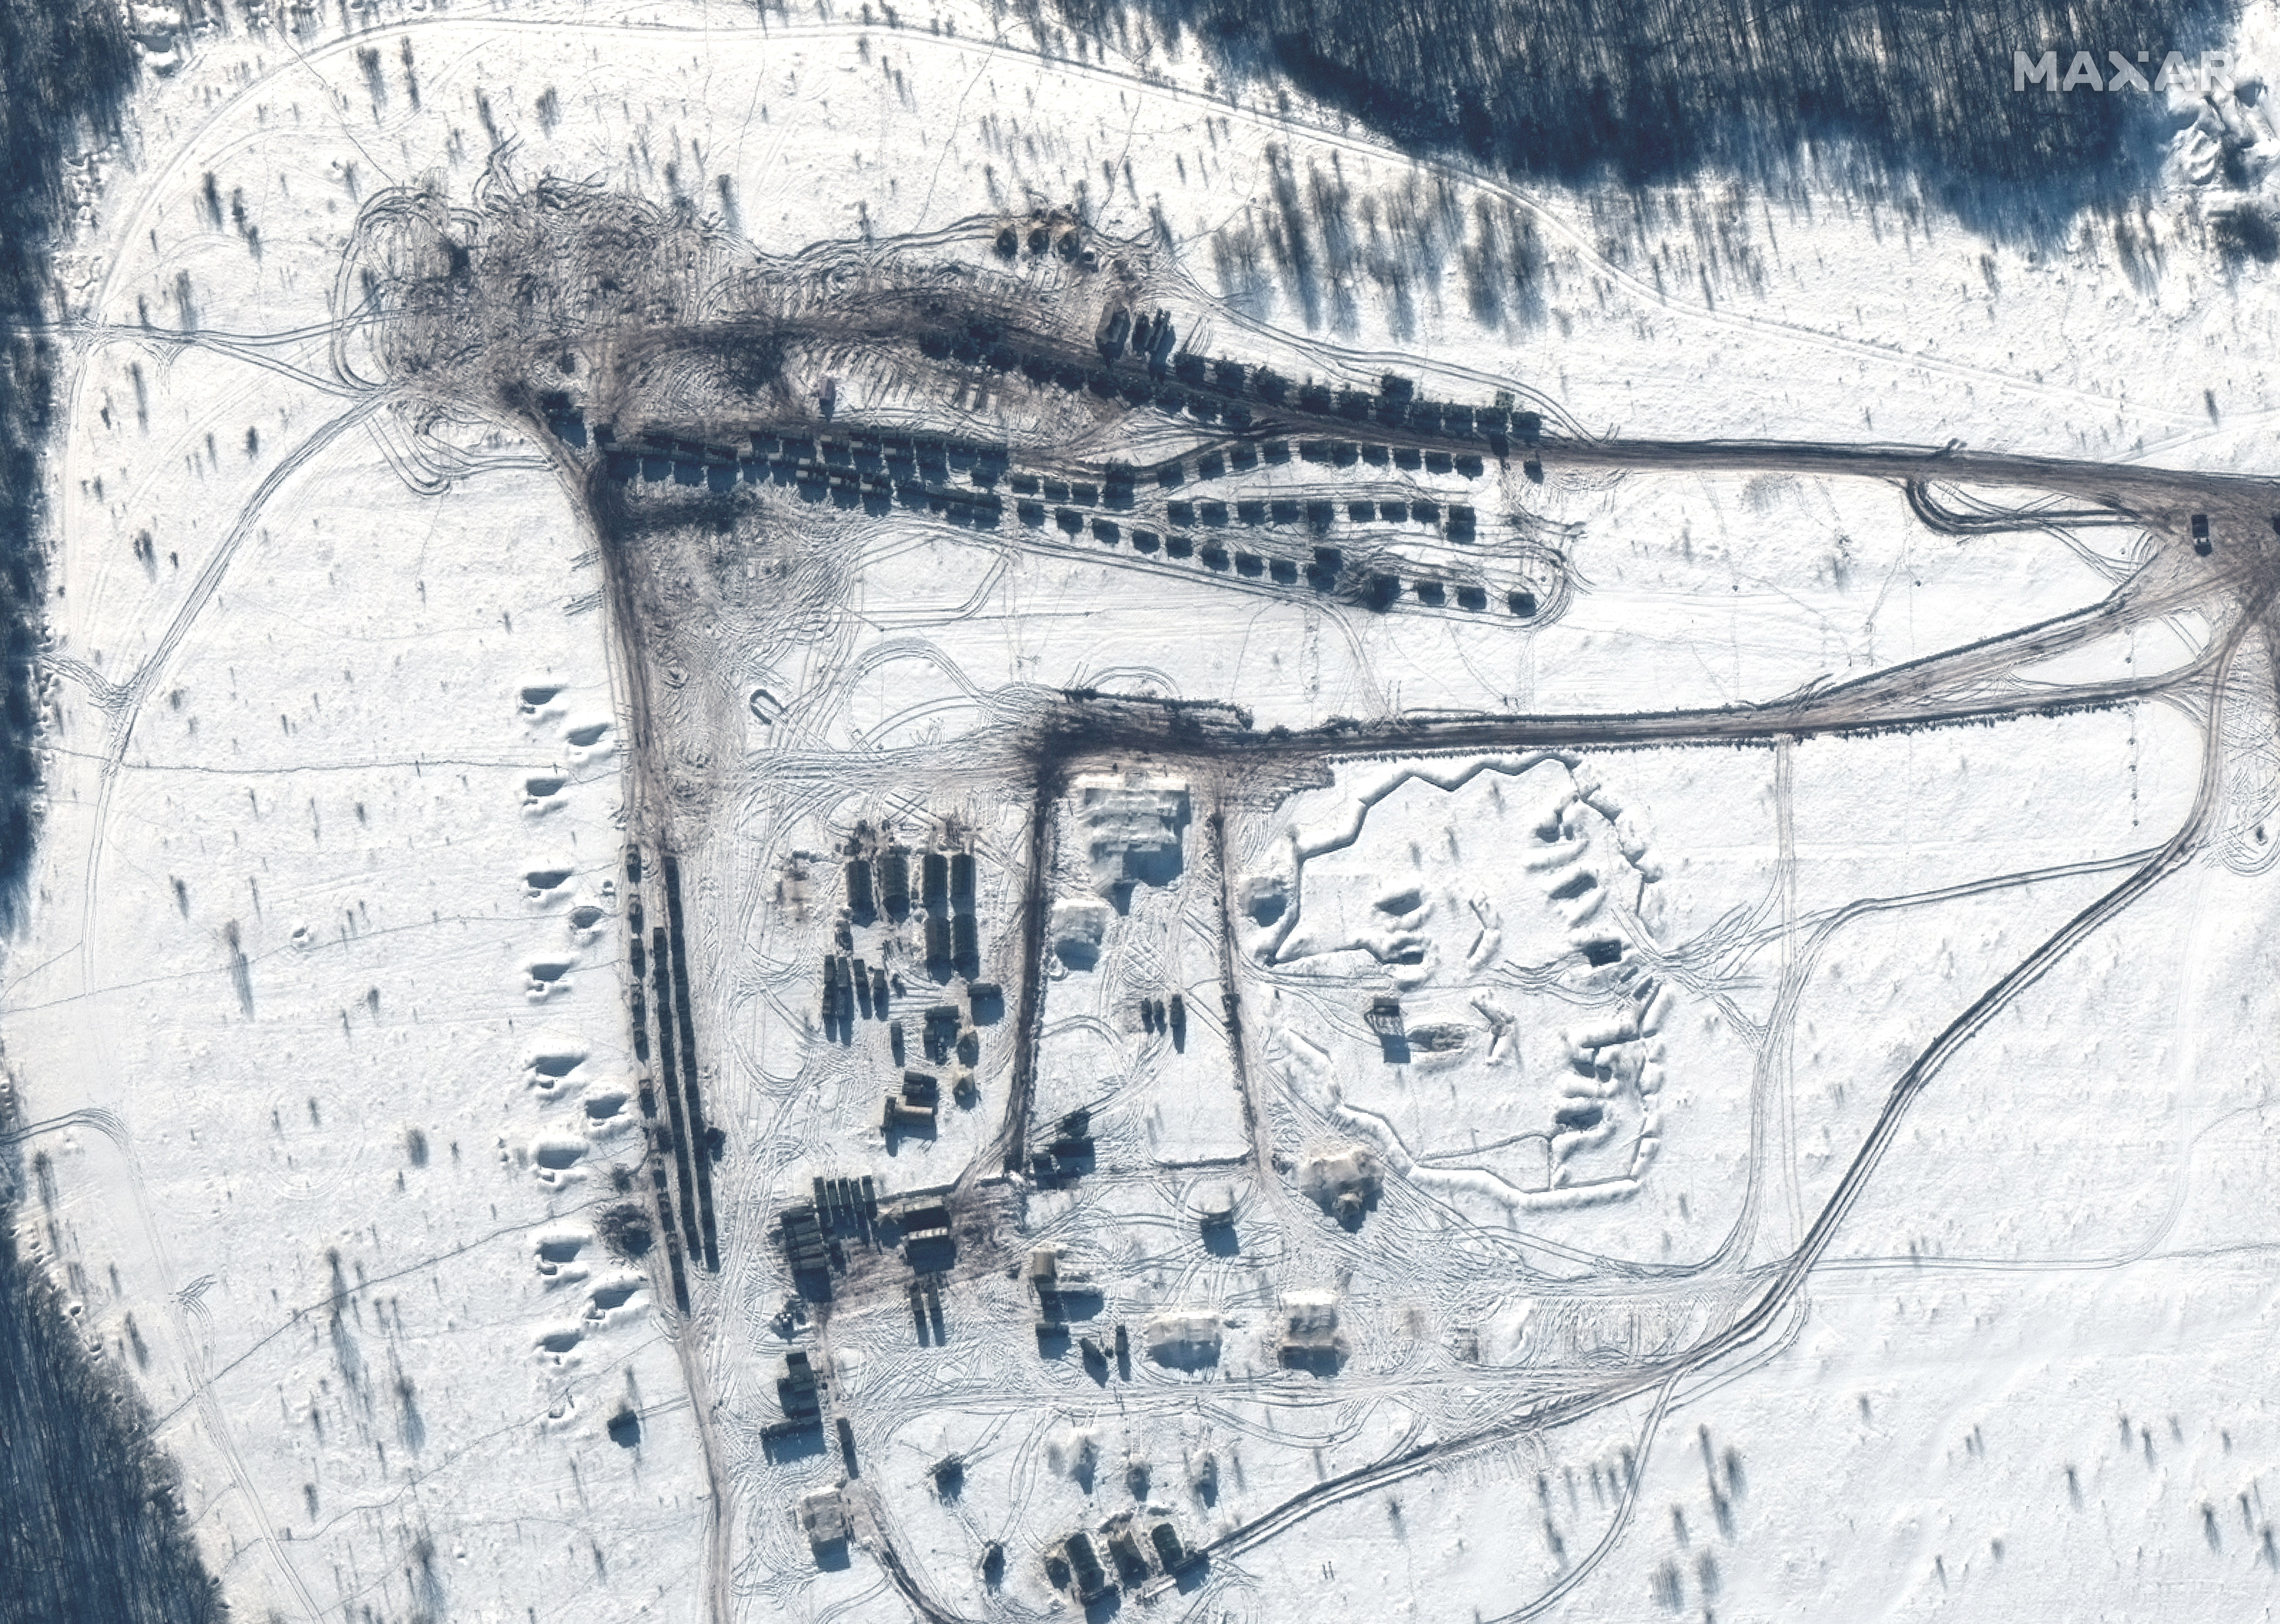 A satellite image shows battle group equipment at the Kursk training area